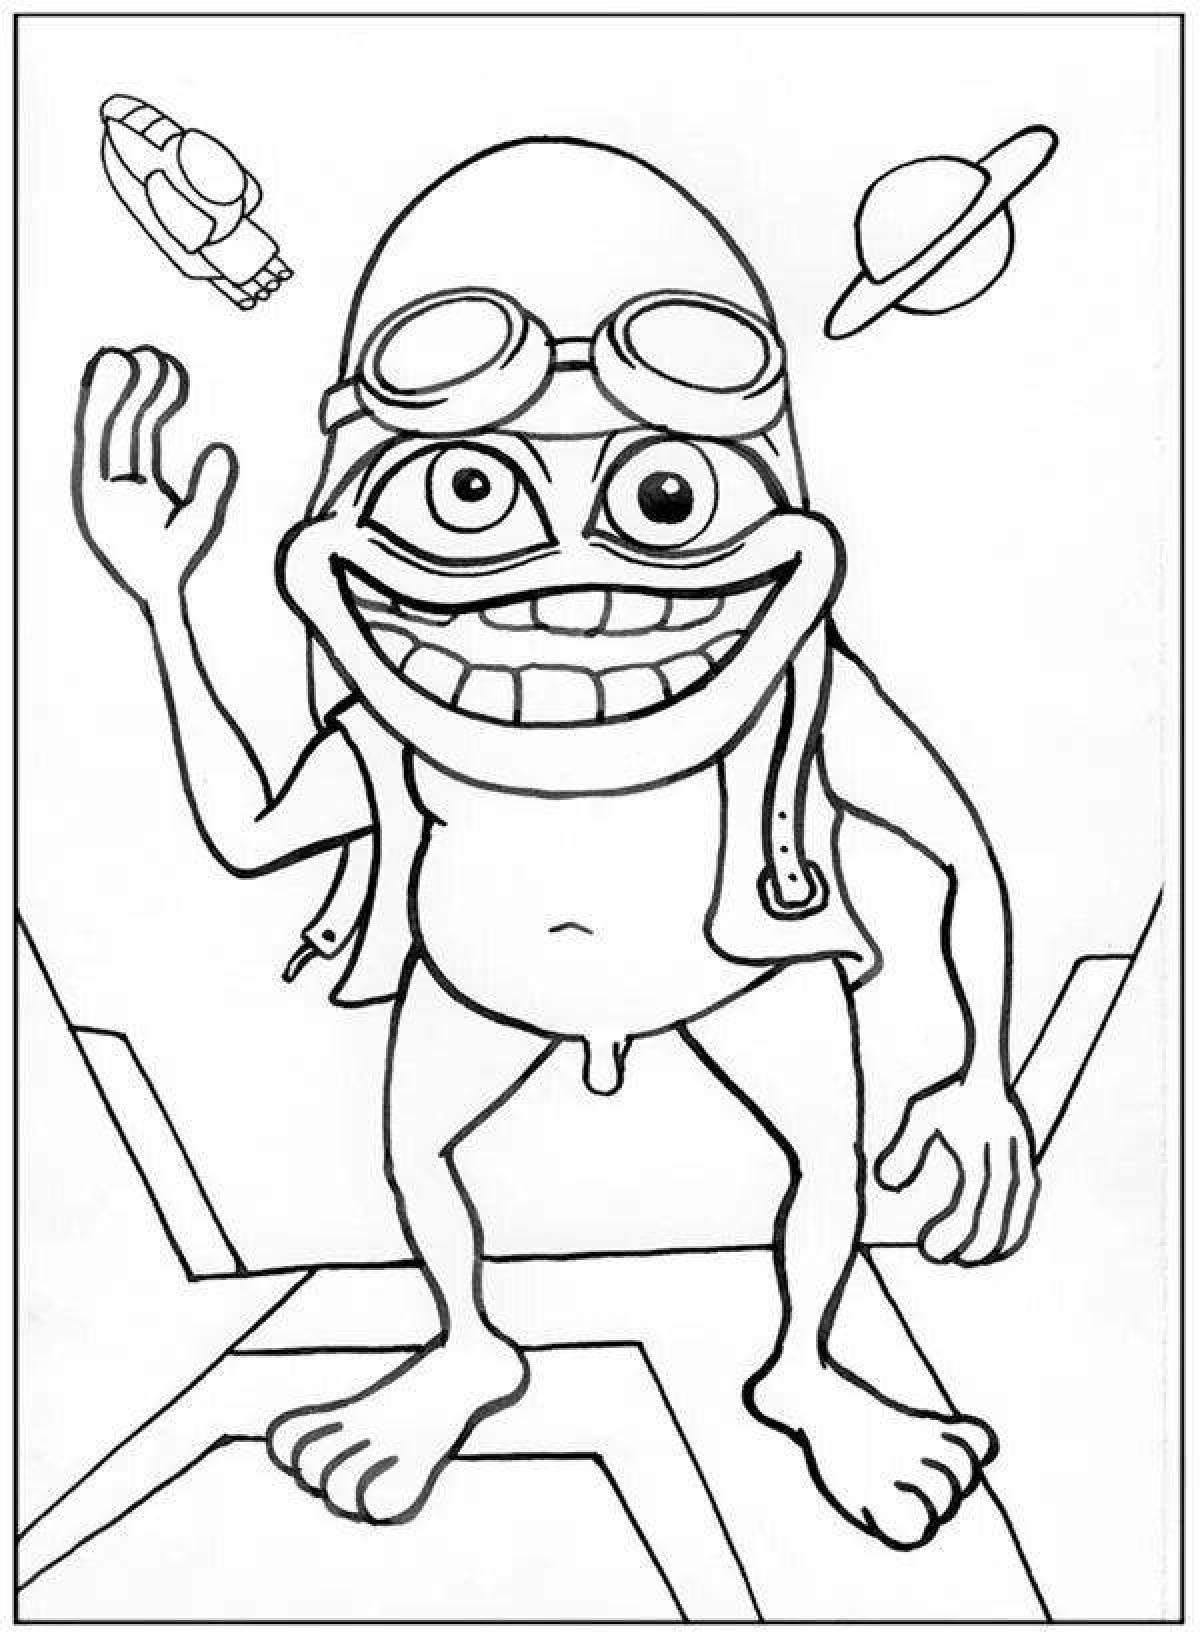 Dazzling crazy frog coloring book